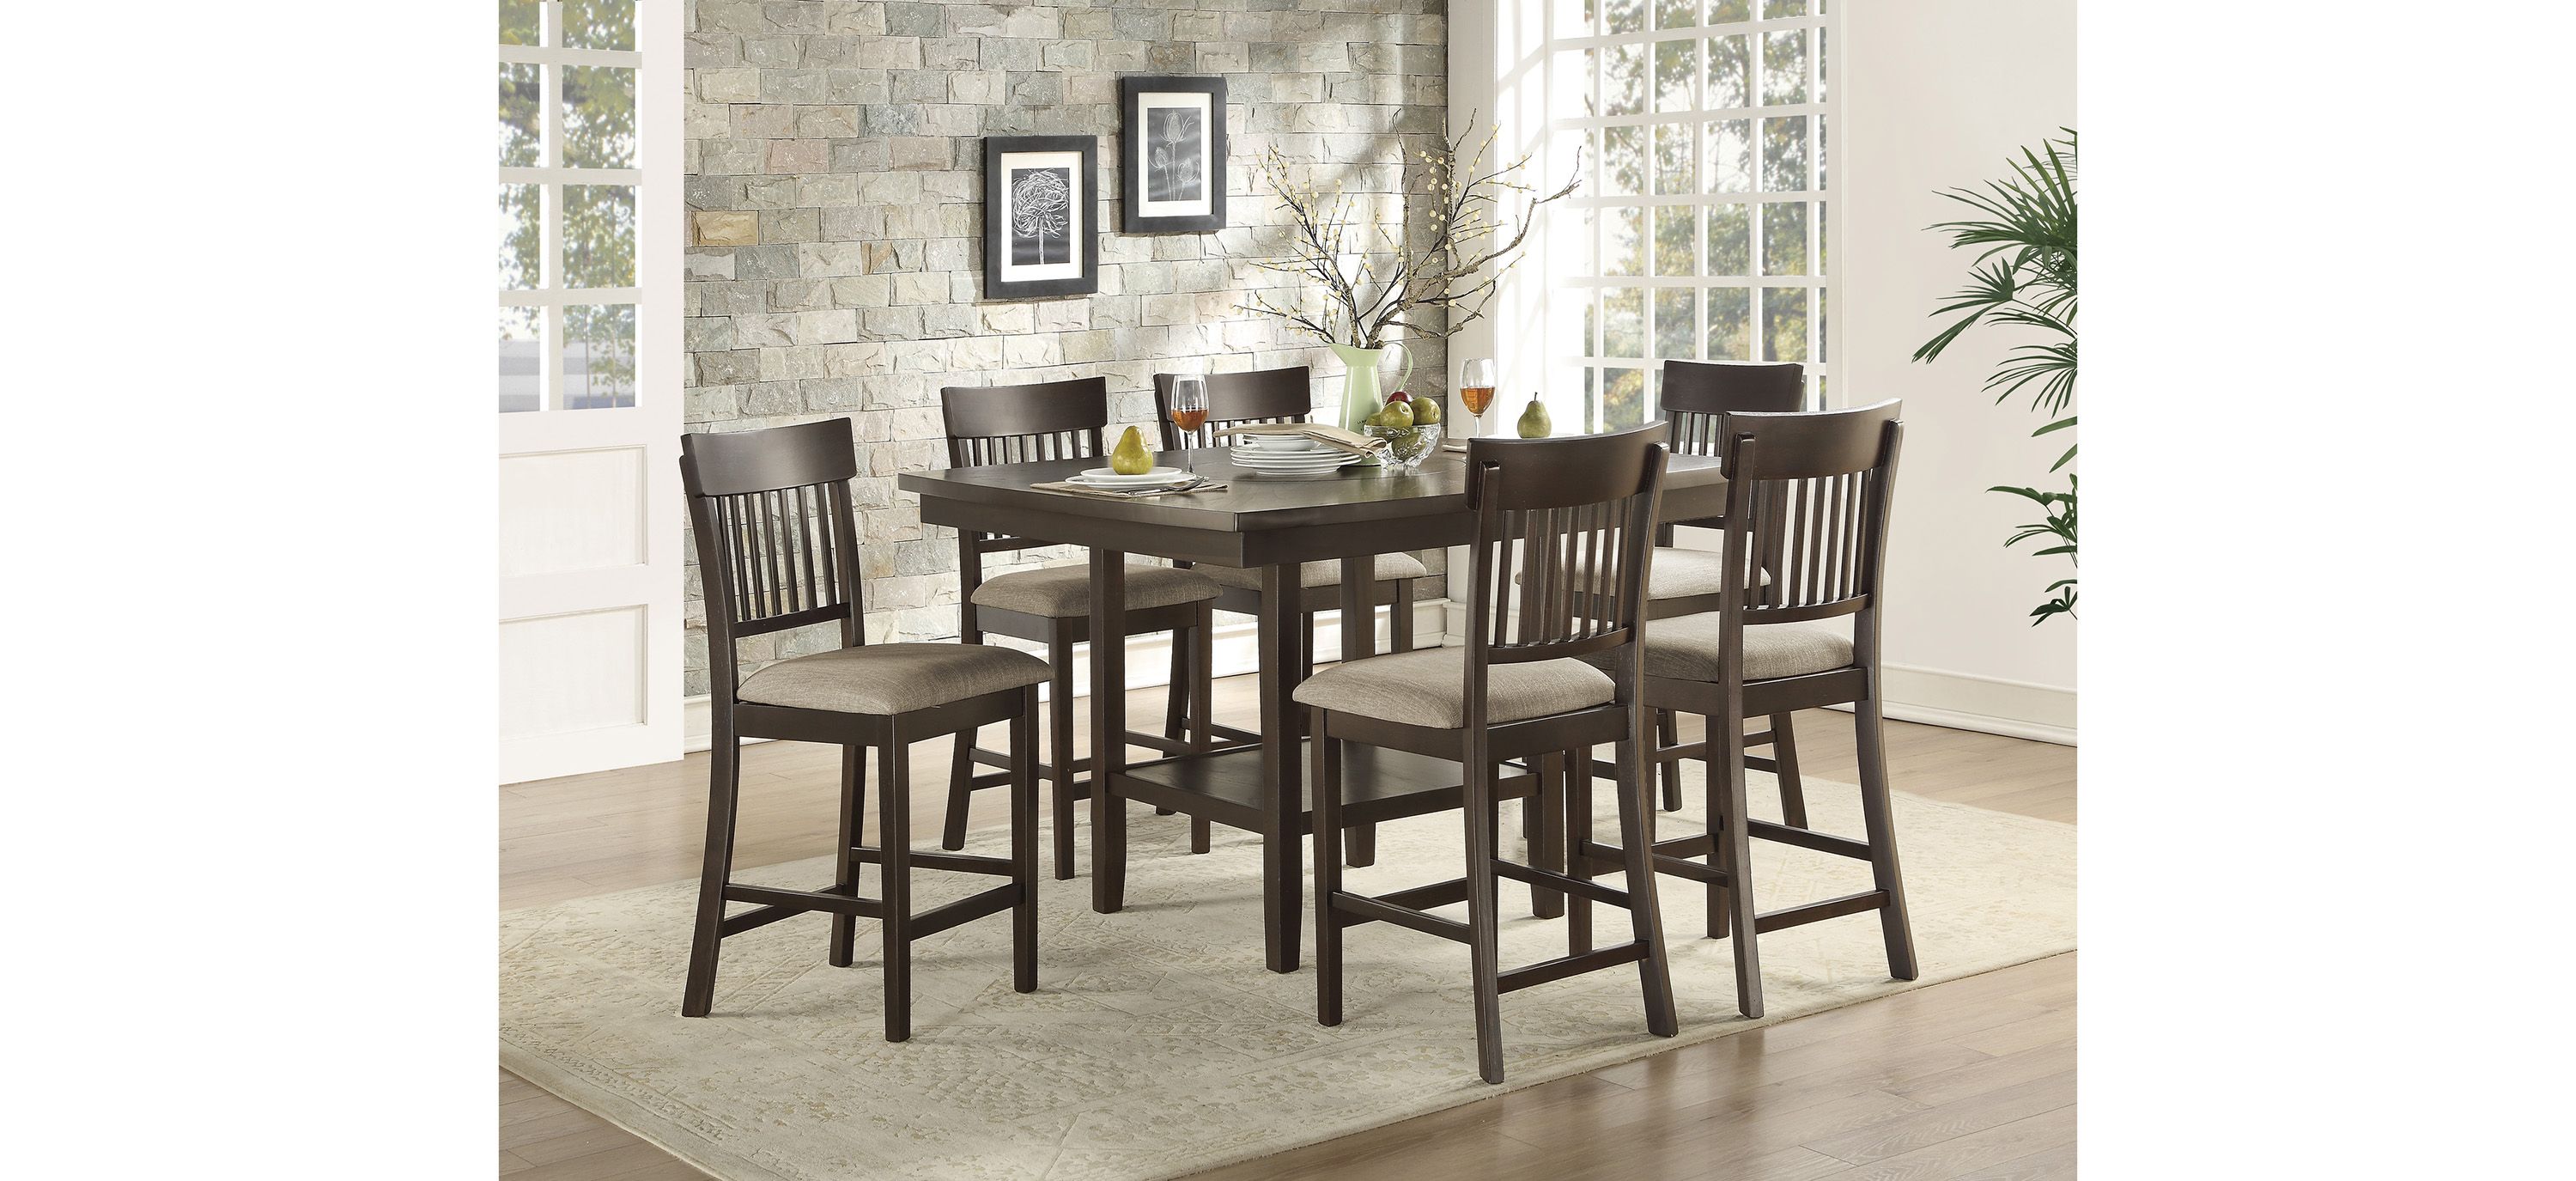 Blair Farm 7-pc. Counter Height Dining Set with Slat Back Chairs